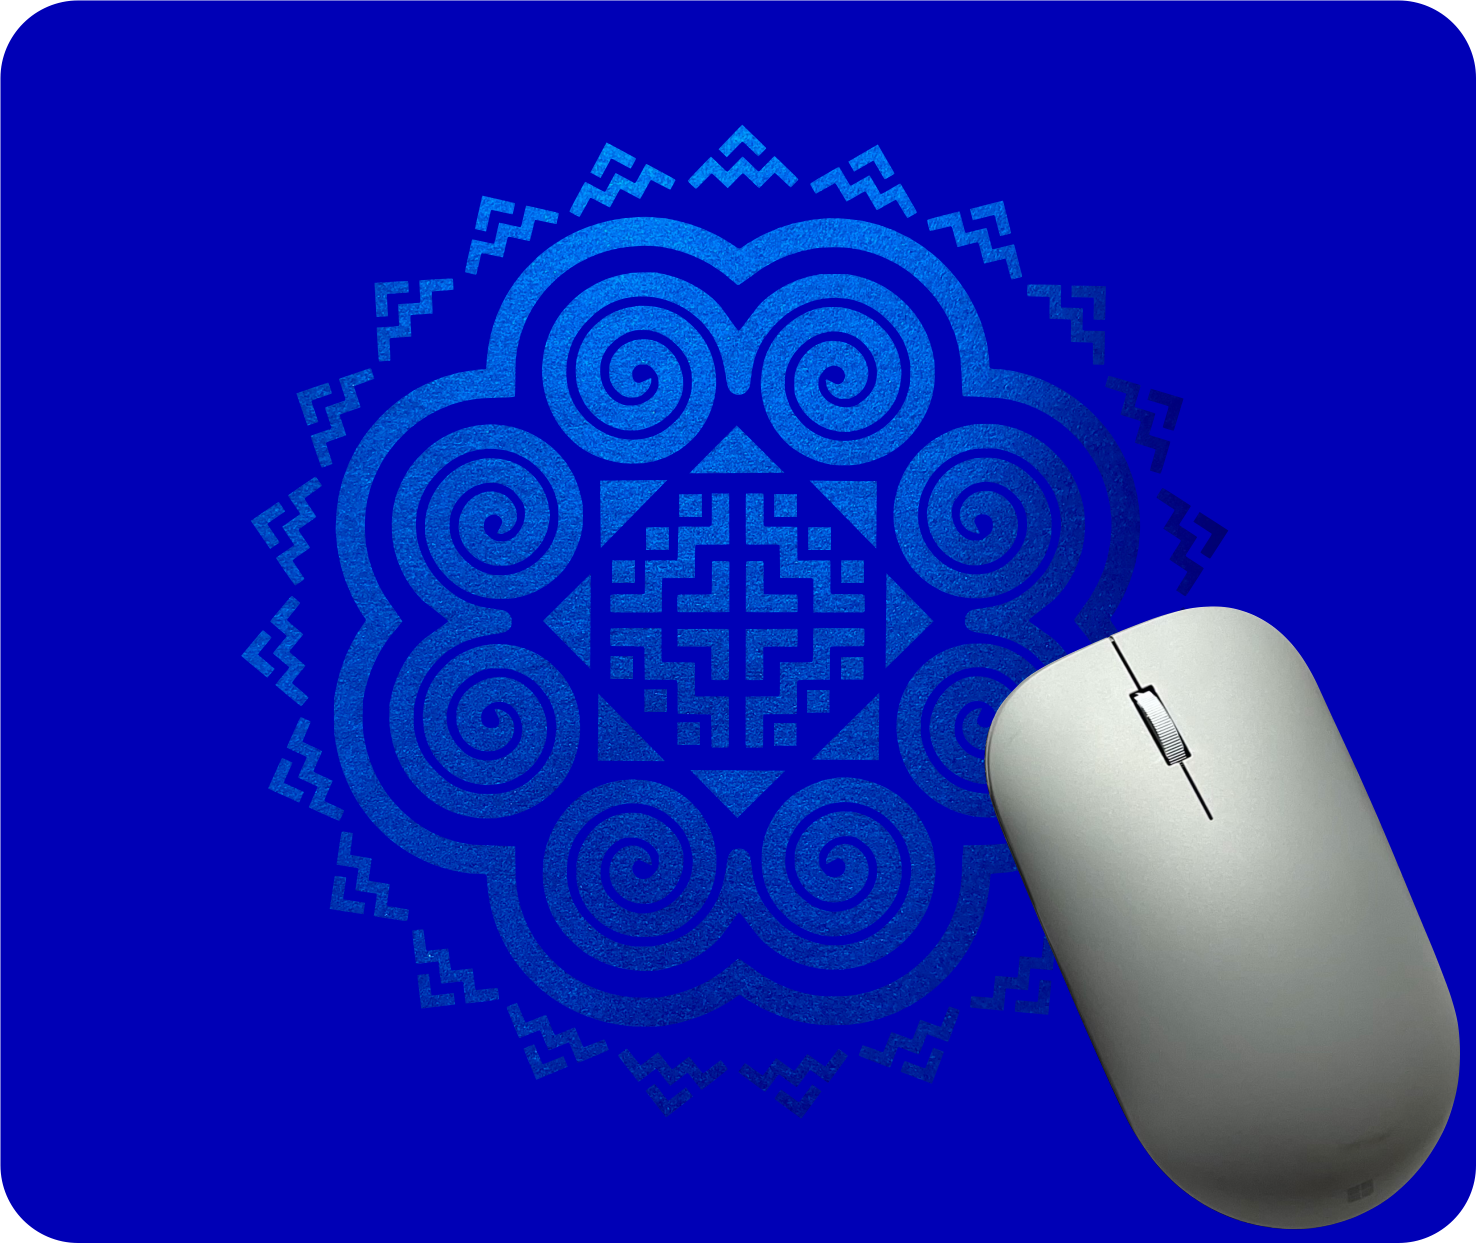 Hmong Inspired Mouse Pad - Blue & Metallic Blue